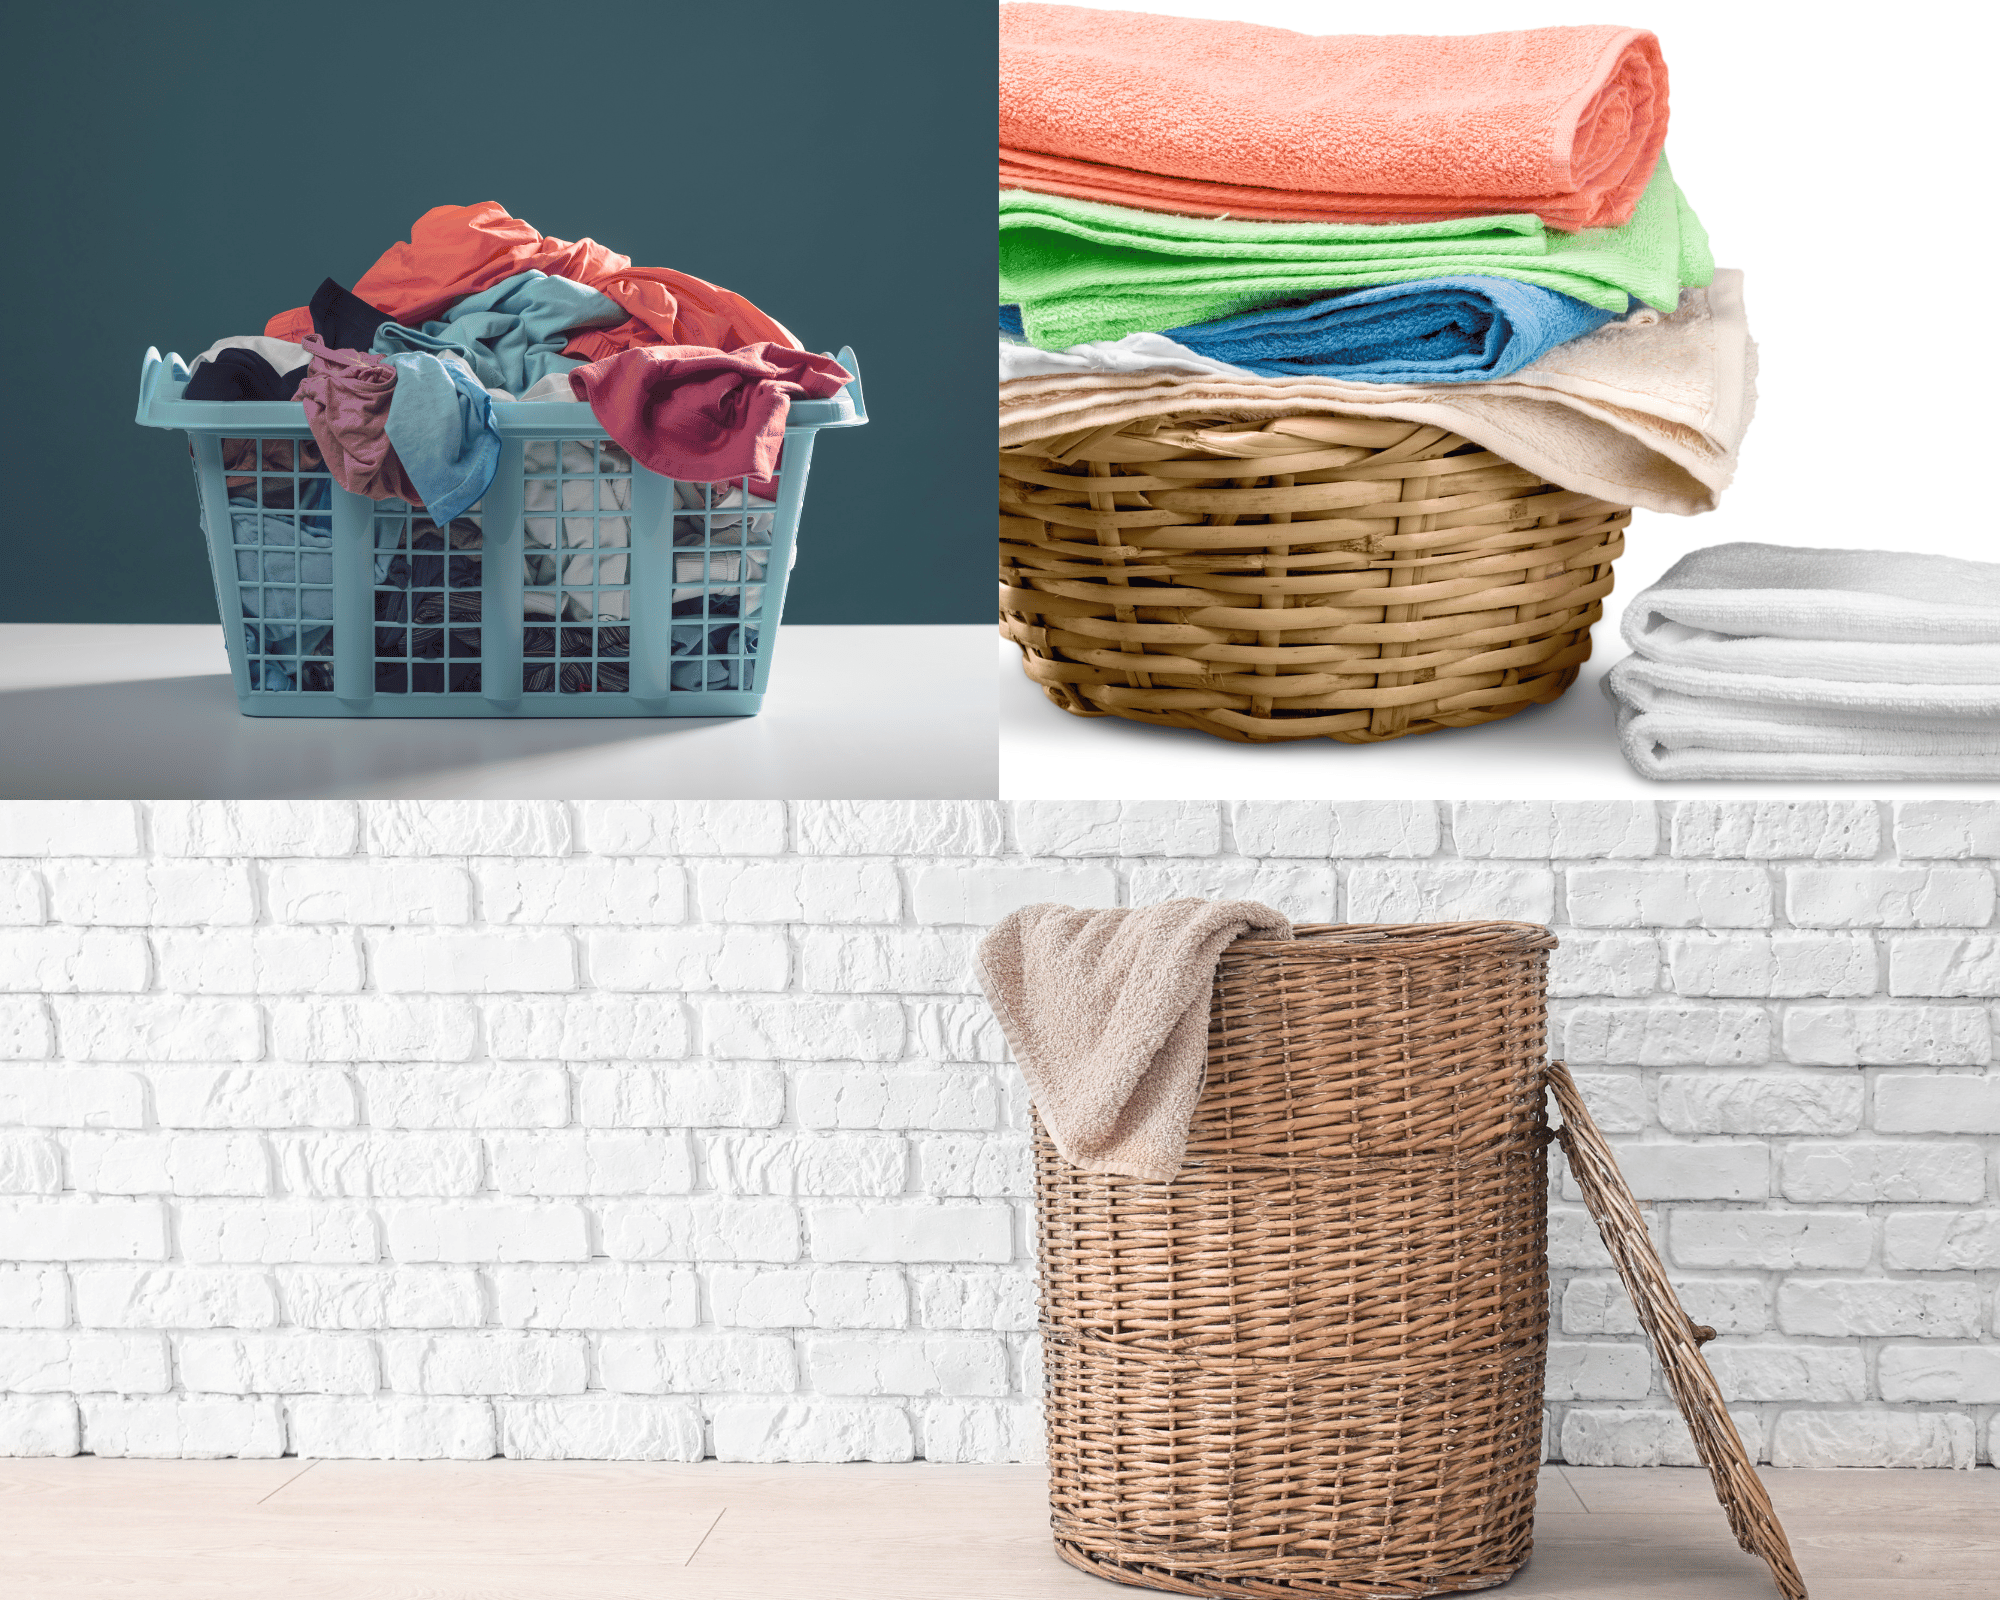 Sterilite Laundry Baskets That Will Revolutionize Your Laundry Routine